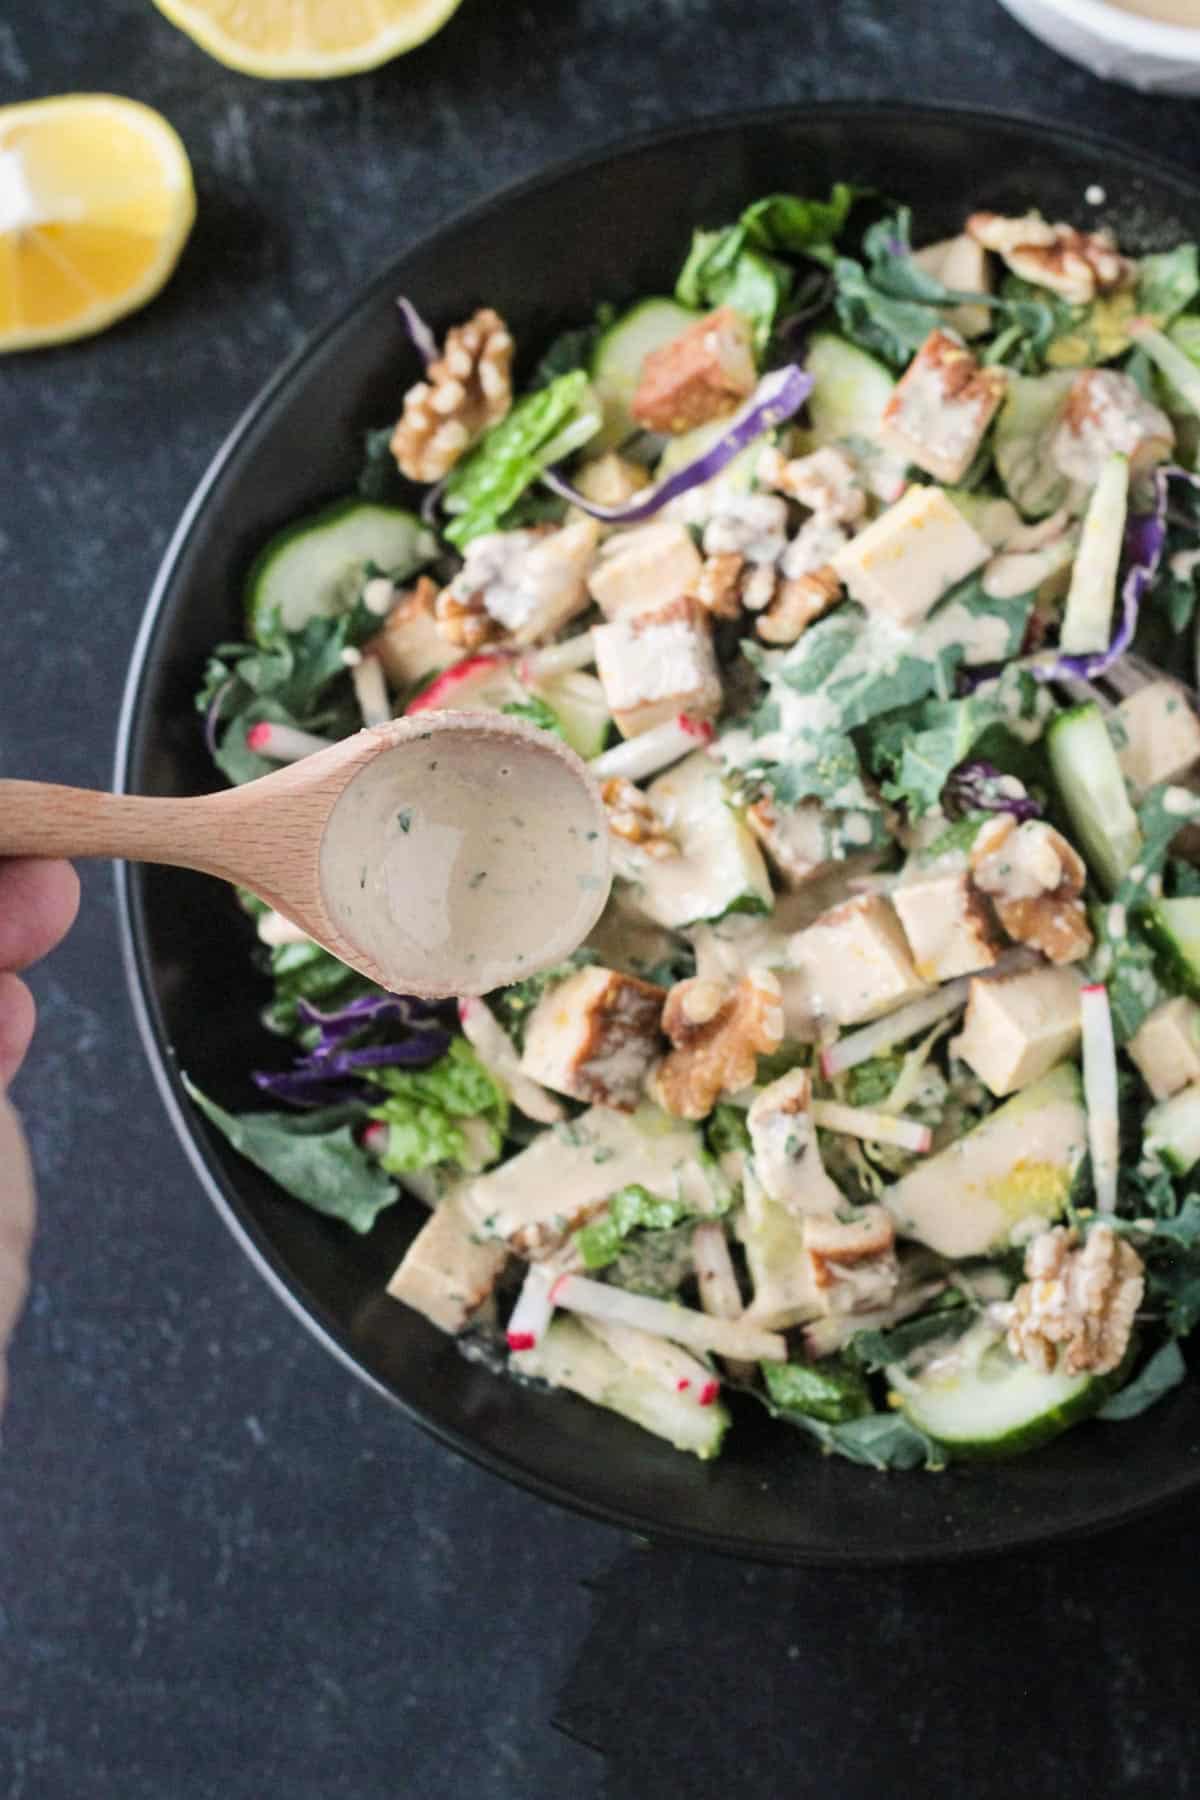 Wooden spoon drizzling salad dressing over a salad.